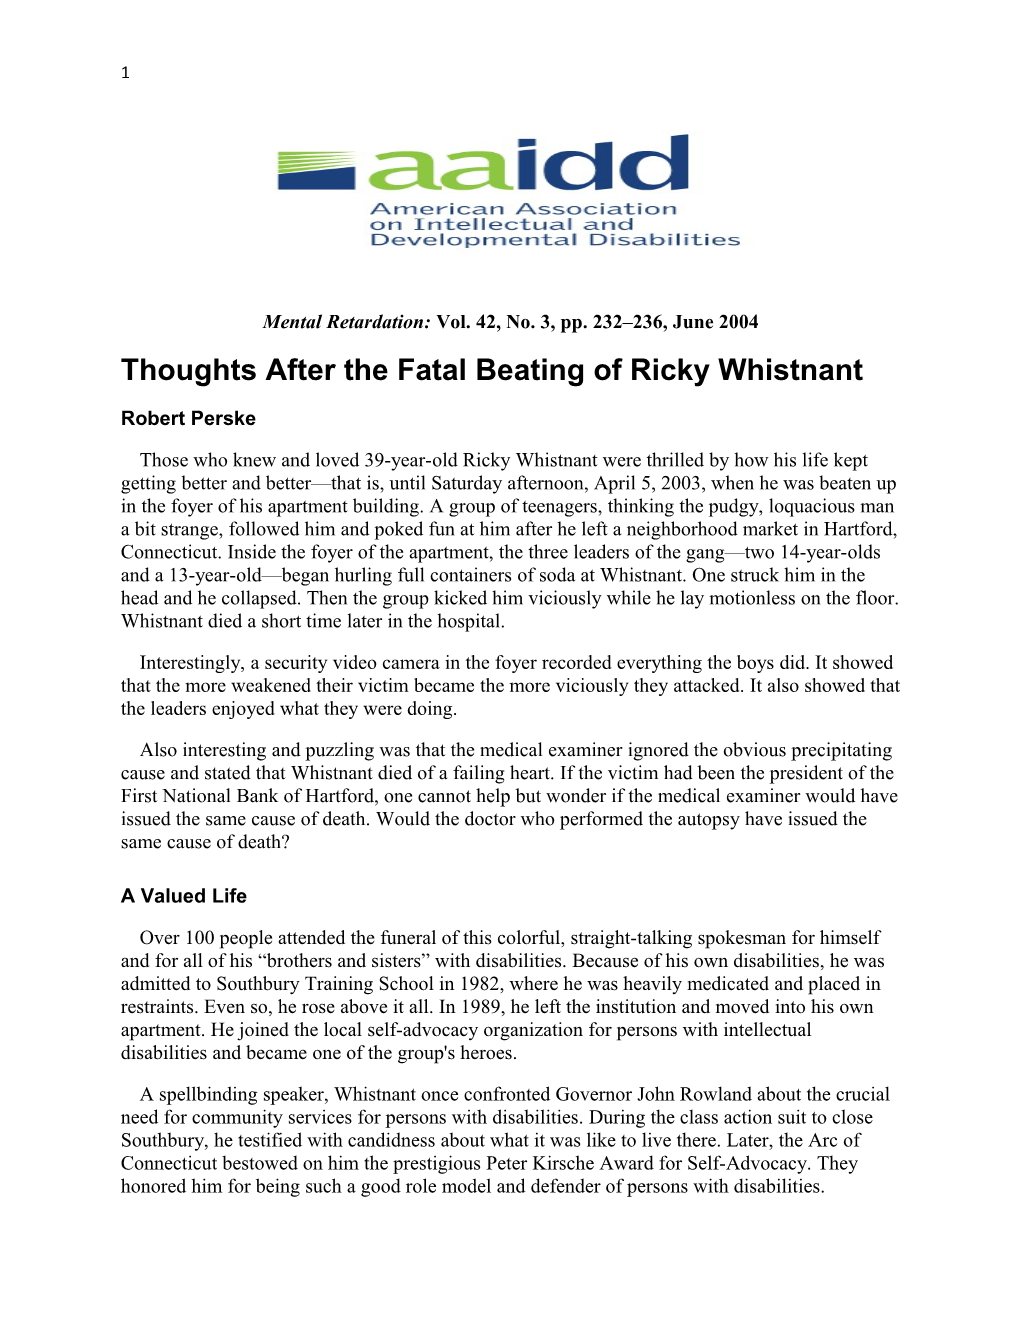 Thoughts After the Fatal Beating of Ricky Whistnant